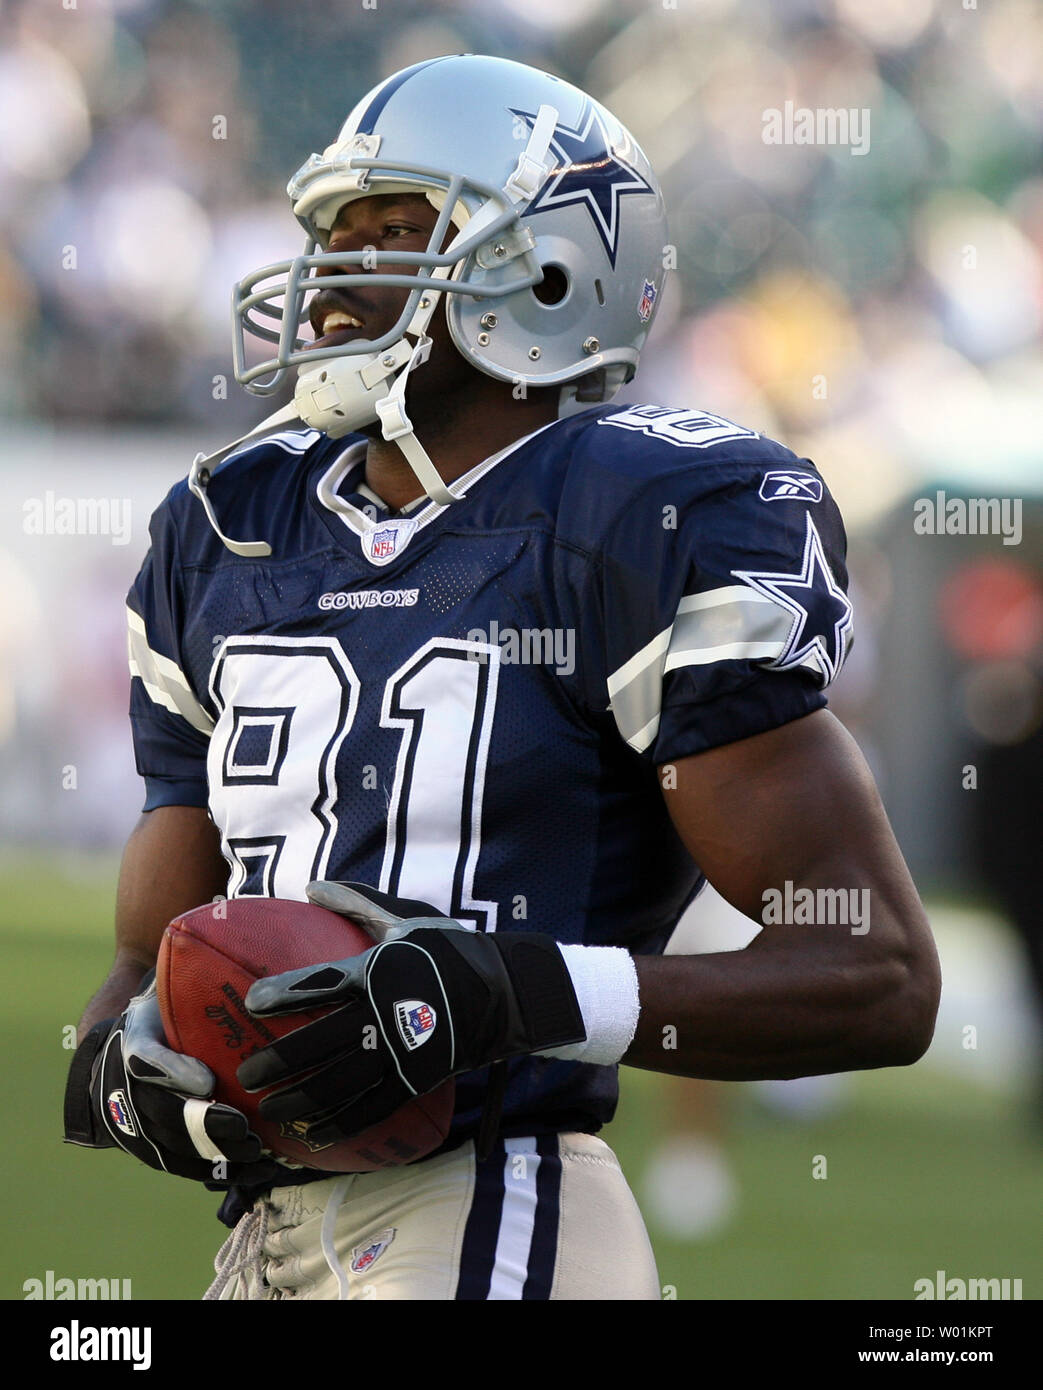 Former Eagles and current Dallas wide receiver Terrell Owens goes through  some pregame practice prior to the Dallas Cowboys-Philadelphia Eagles NFL  football action at Philadelphia's Lincoln Field October 8, 2006. Owens  appeared